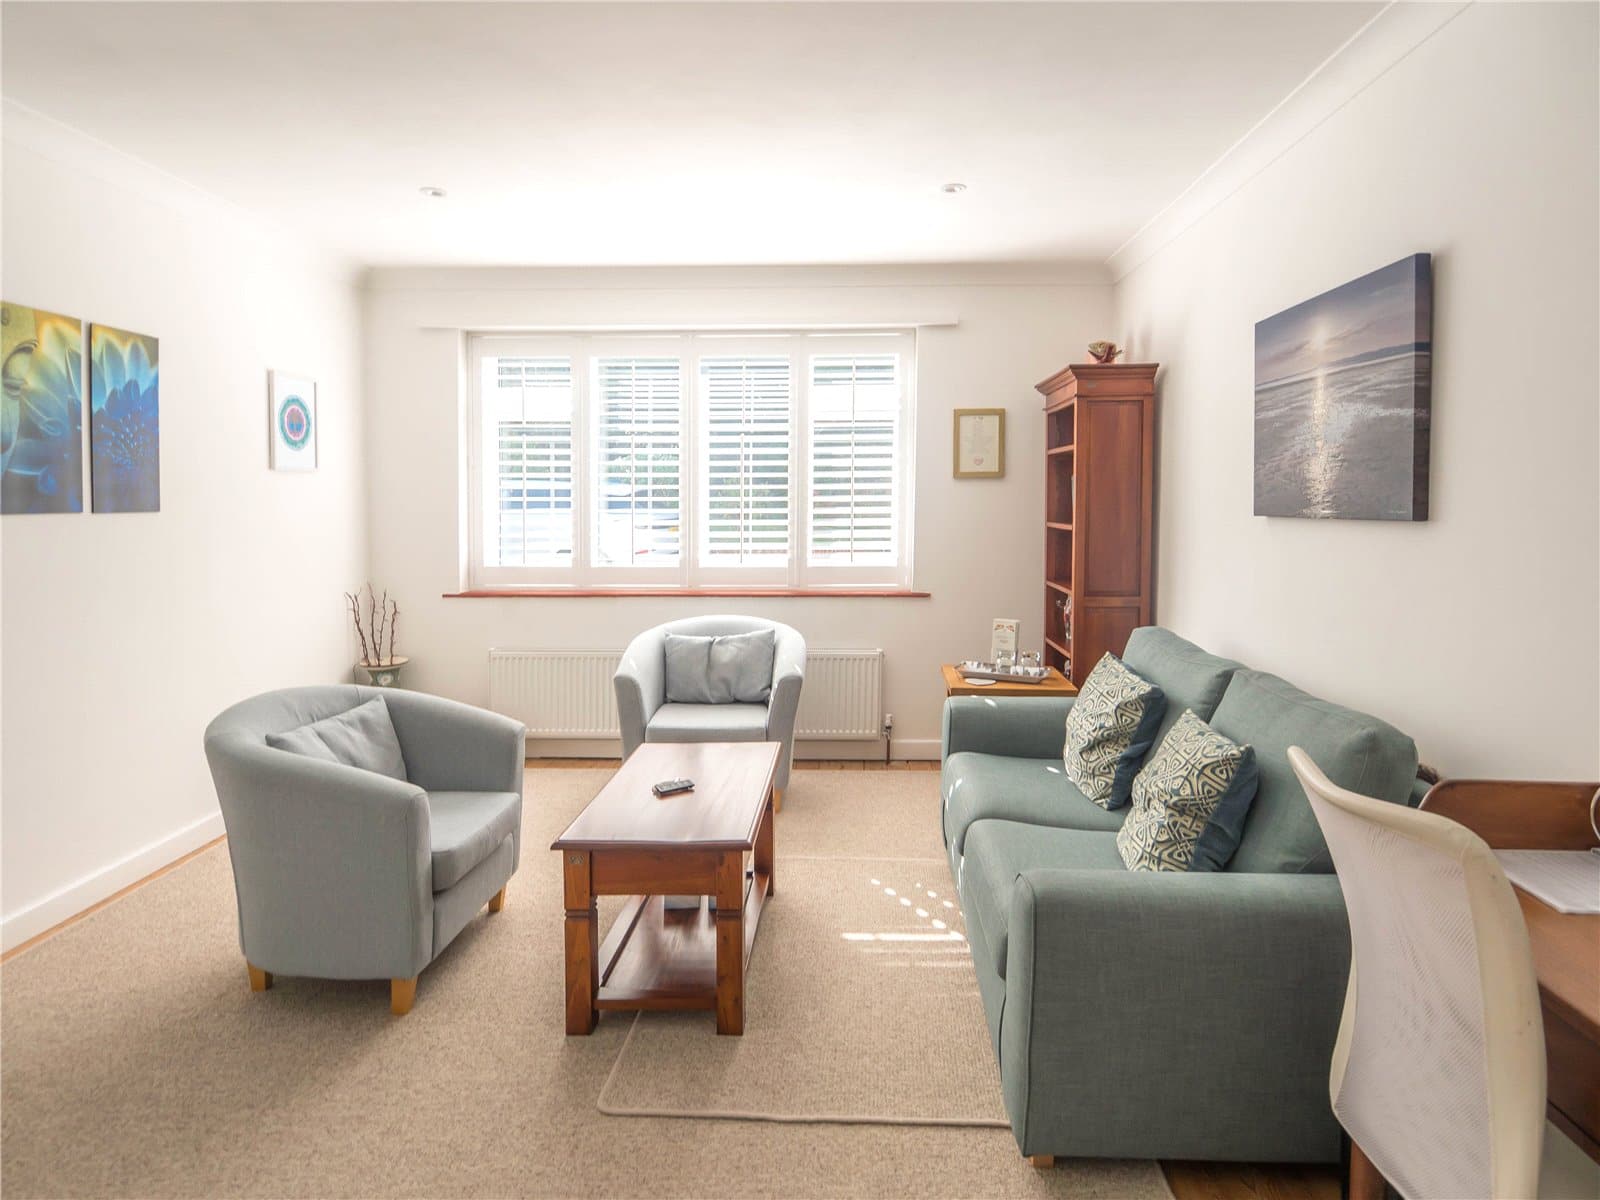 Peartree Lane, Bexhill-on-Sea, East Sussex,  | residential-sales